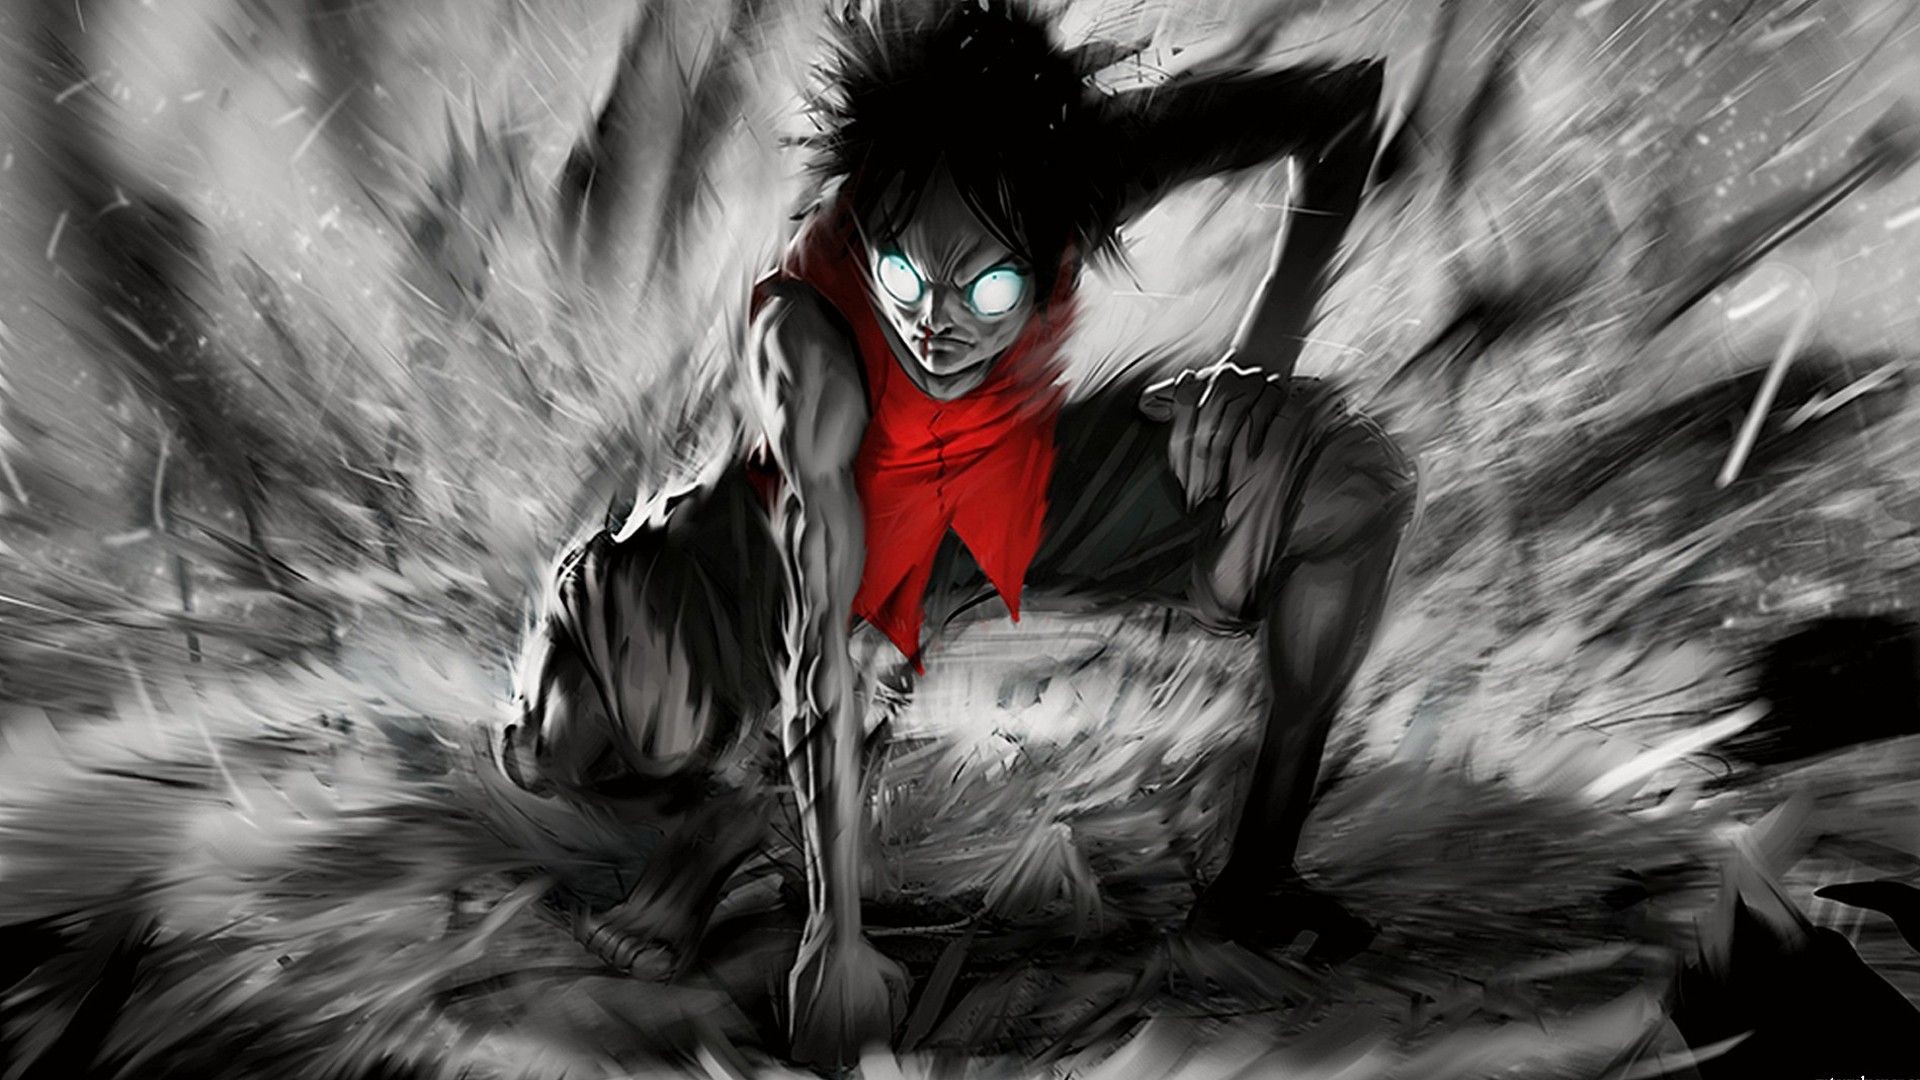 1920x1080 Dark Anime Horror Wallpapers - New HD Wallpapers